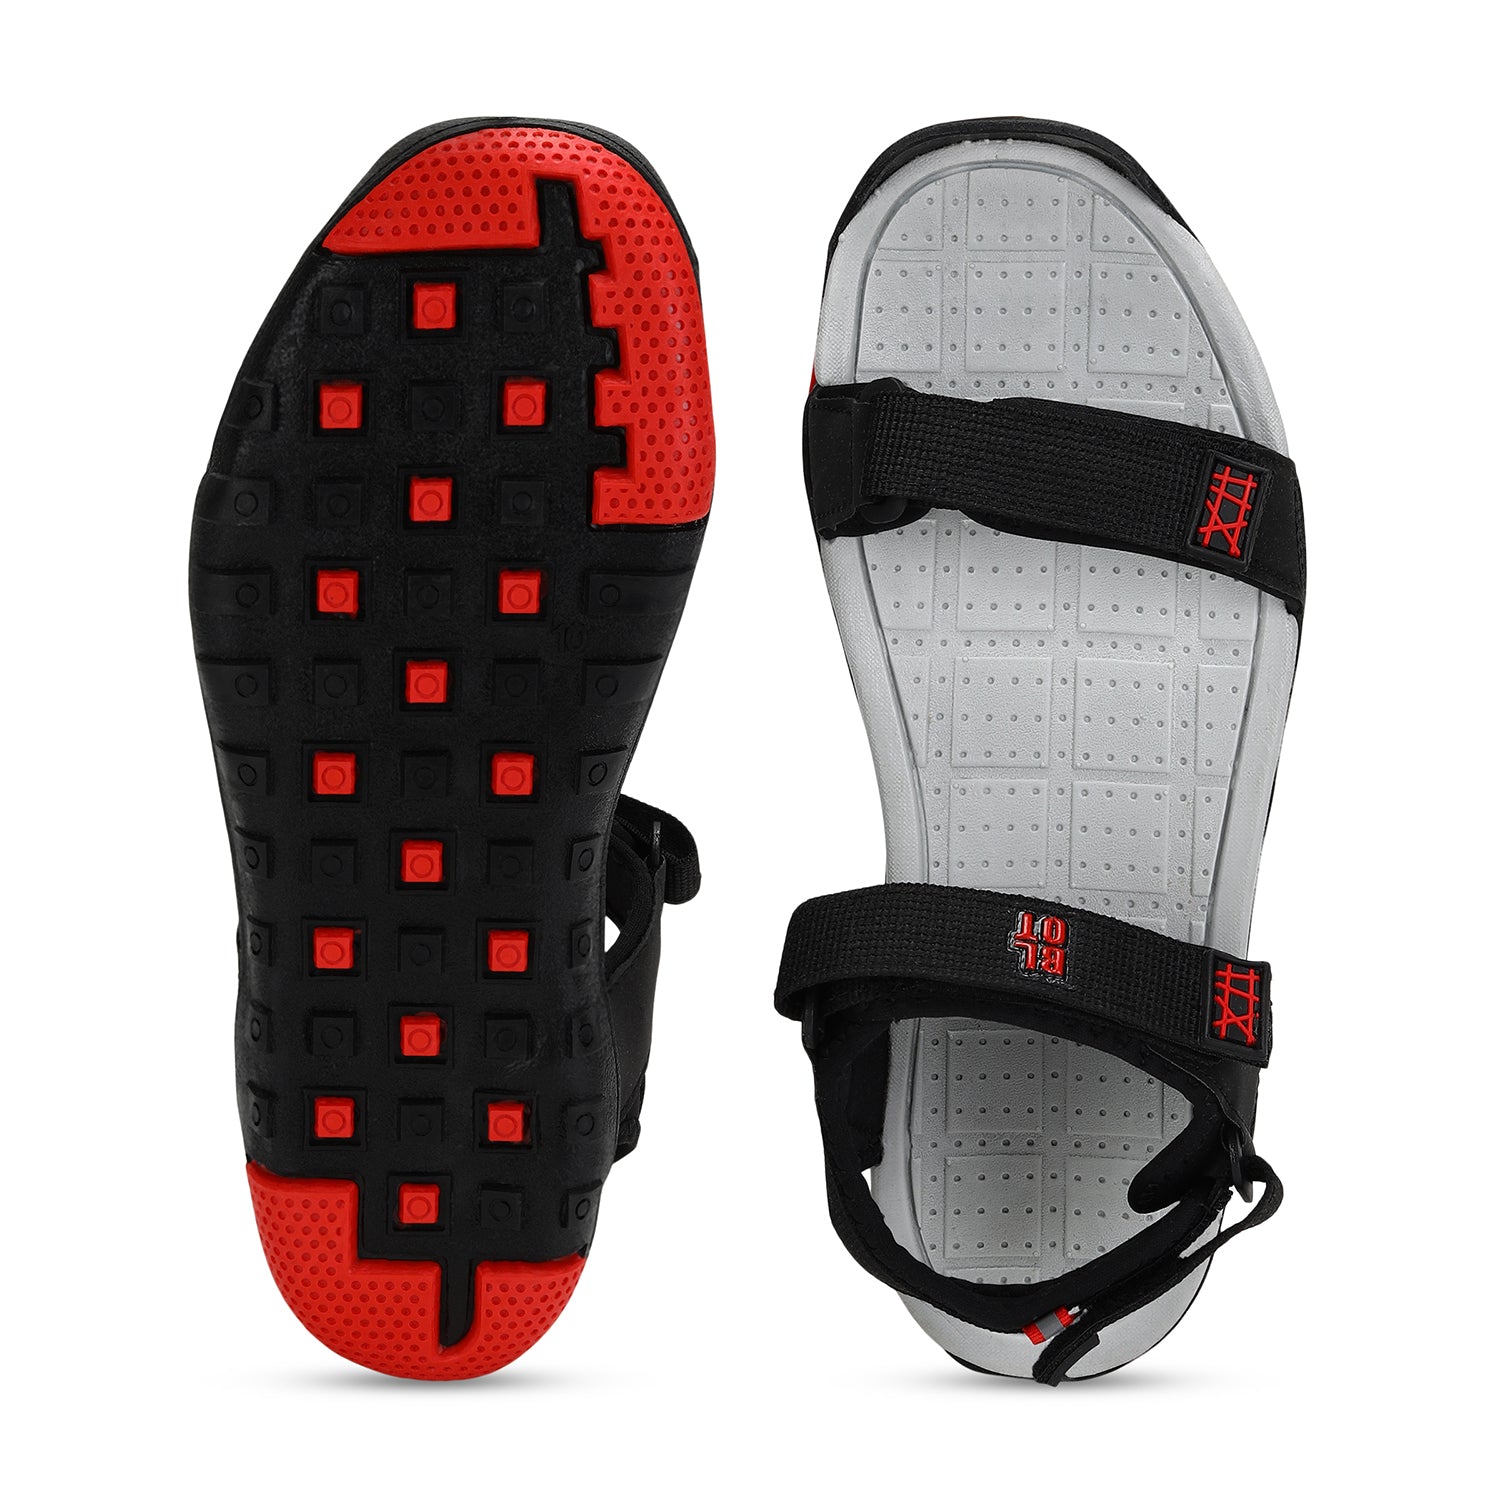 Paragon Blot K1407G Men Stylish Sandals | Comfortable Sandals for Daily Outdoor Use | Casual Formal Sandals with Cushioned Soles